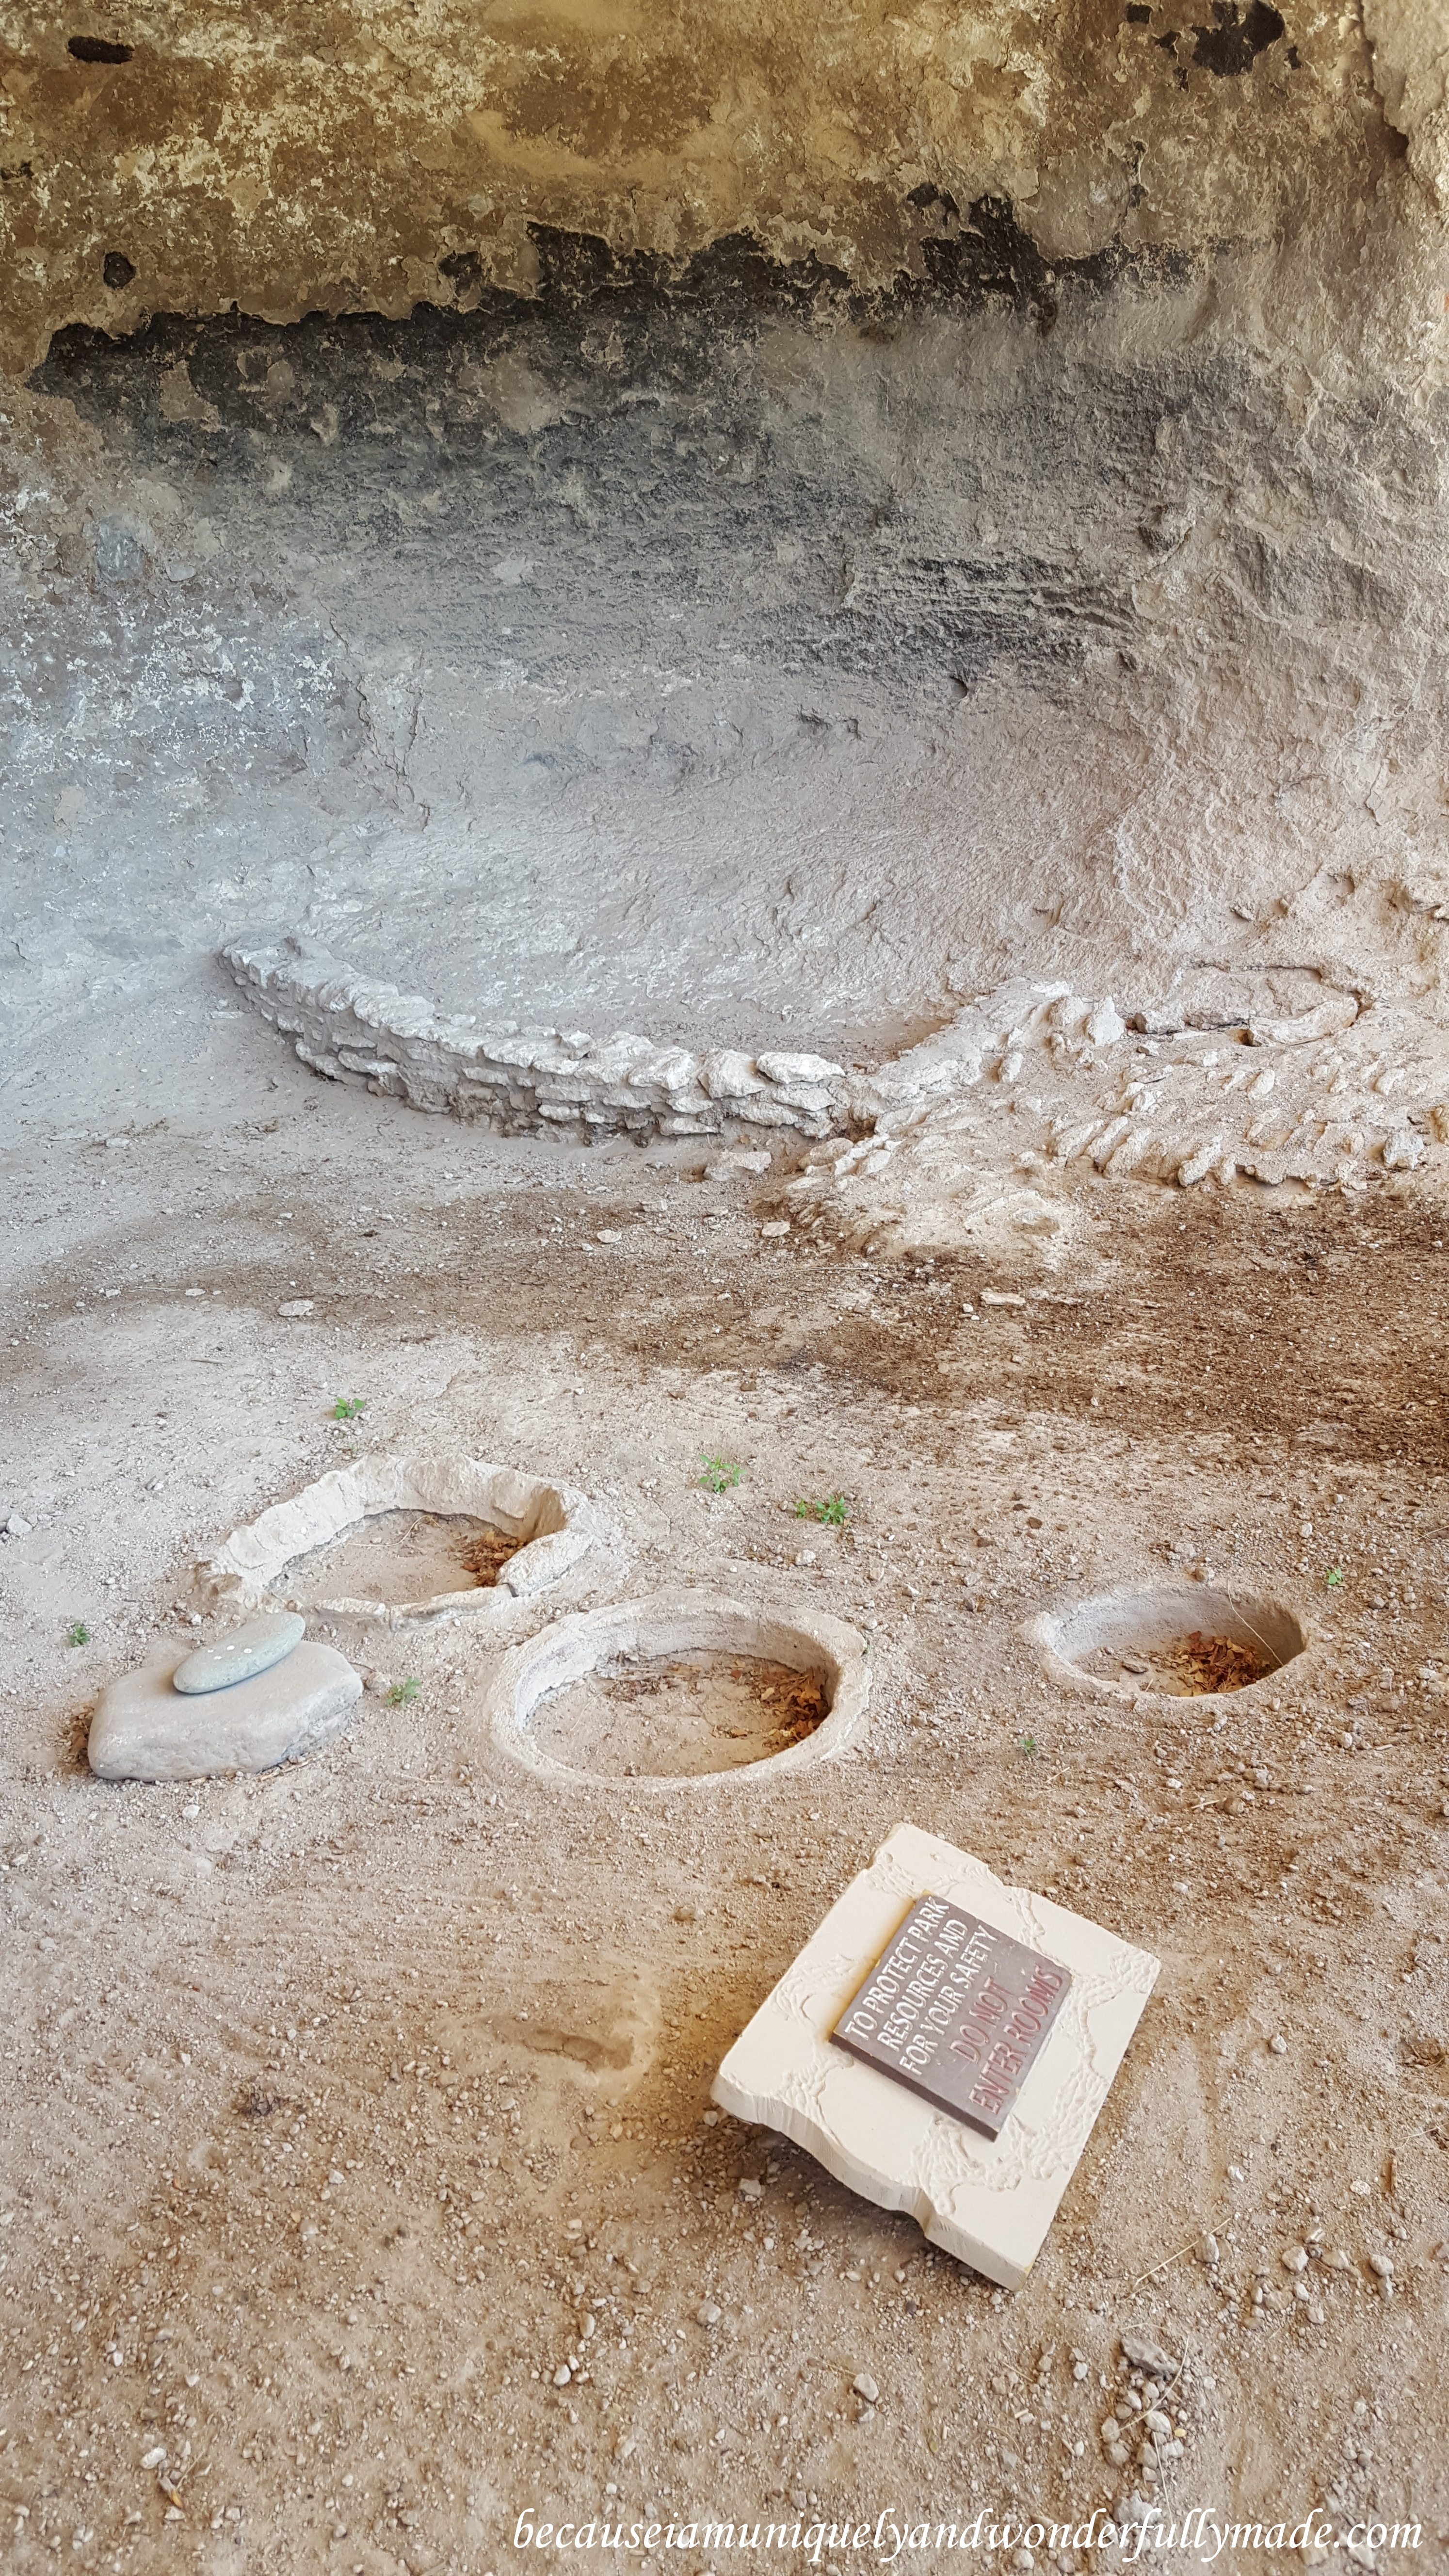 I believe these were firepits inside the cliff dwellings. A proof of a civilization that once flourished here.